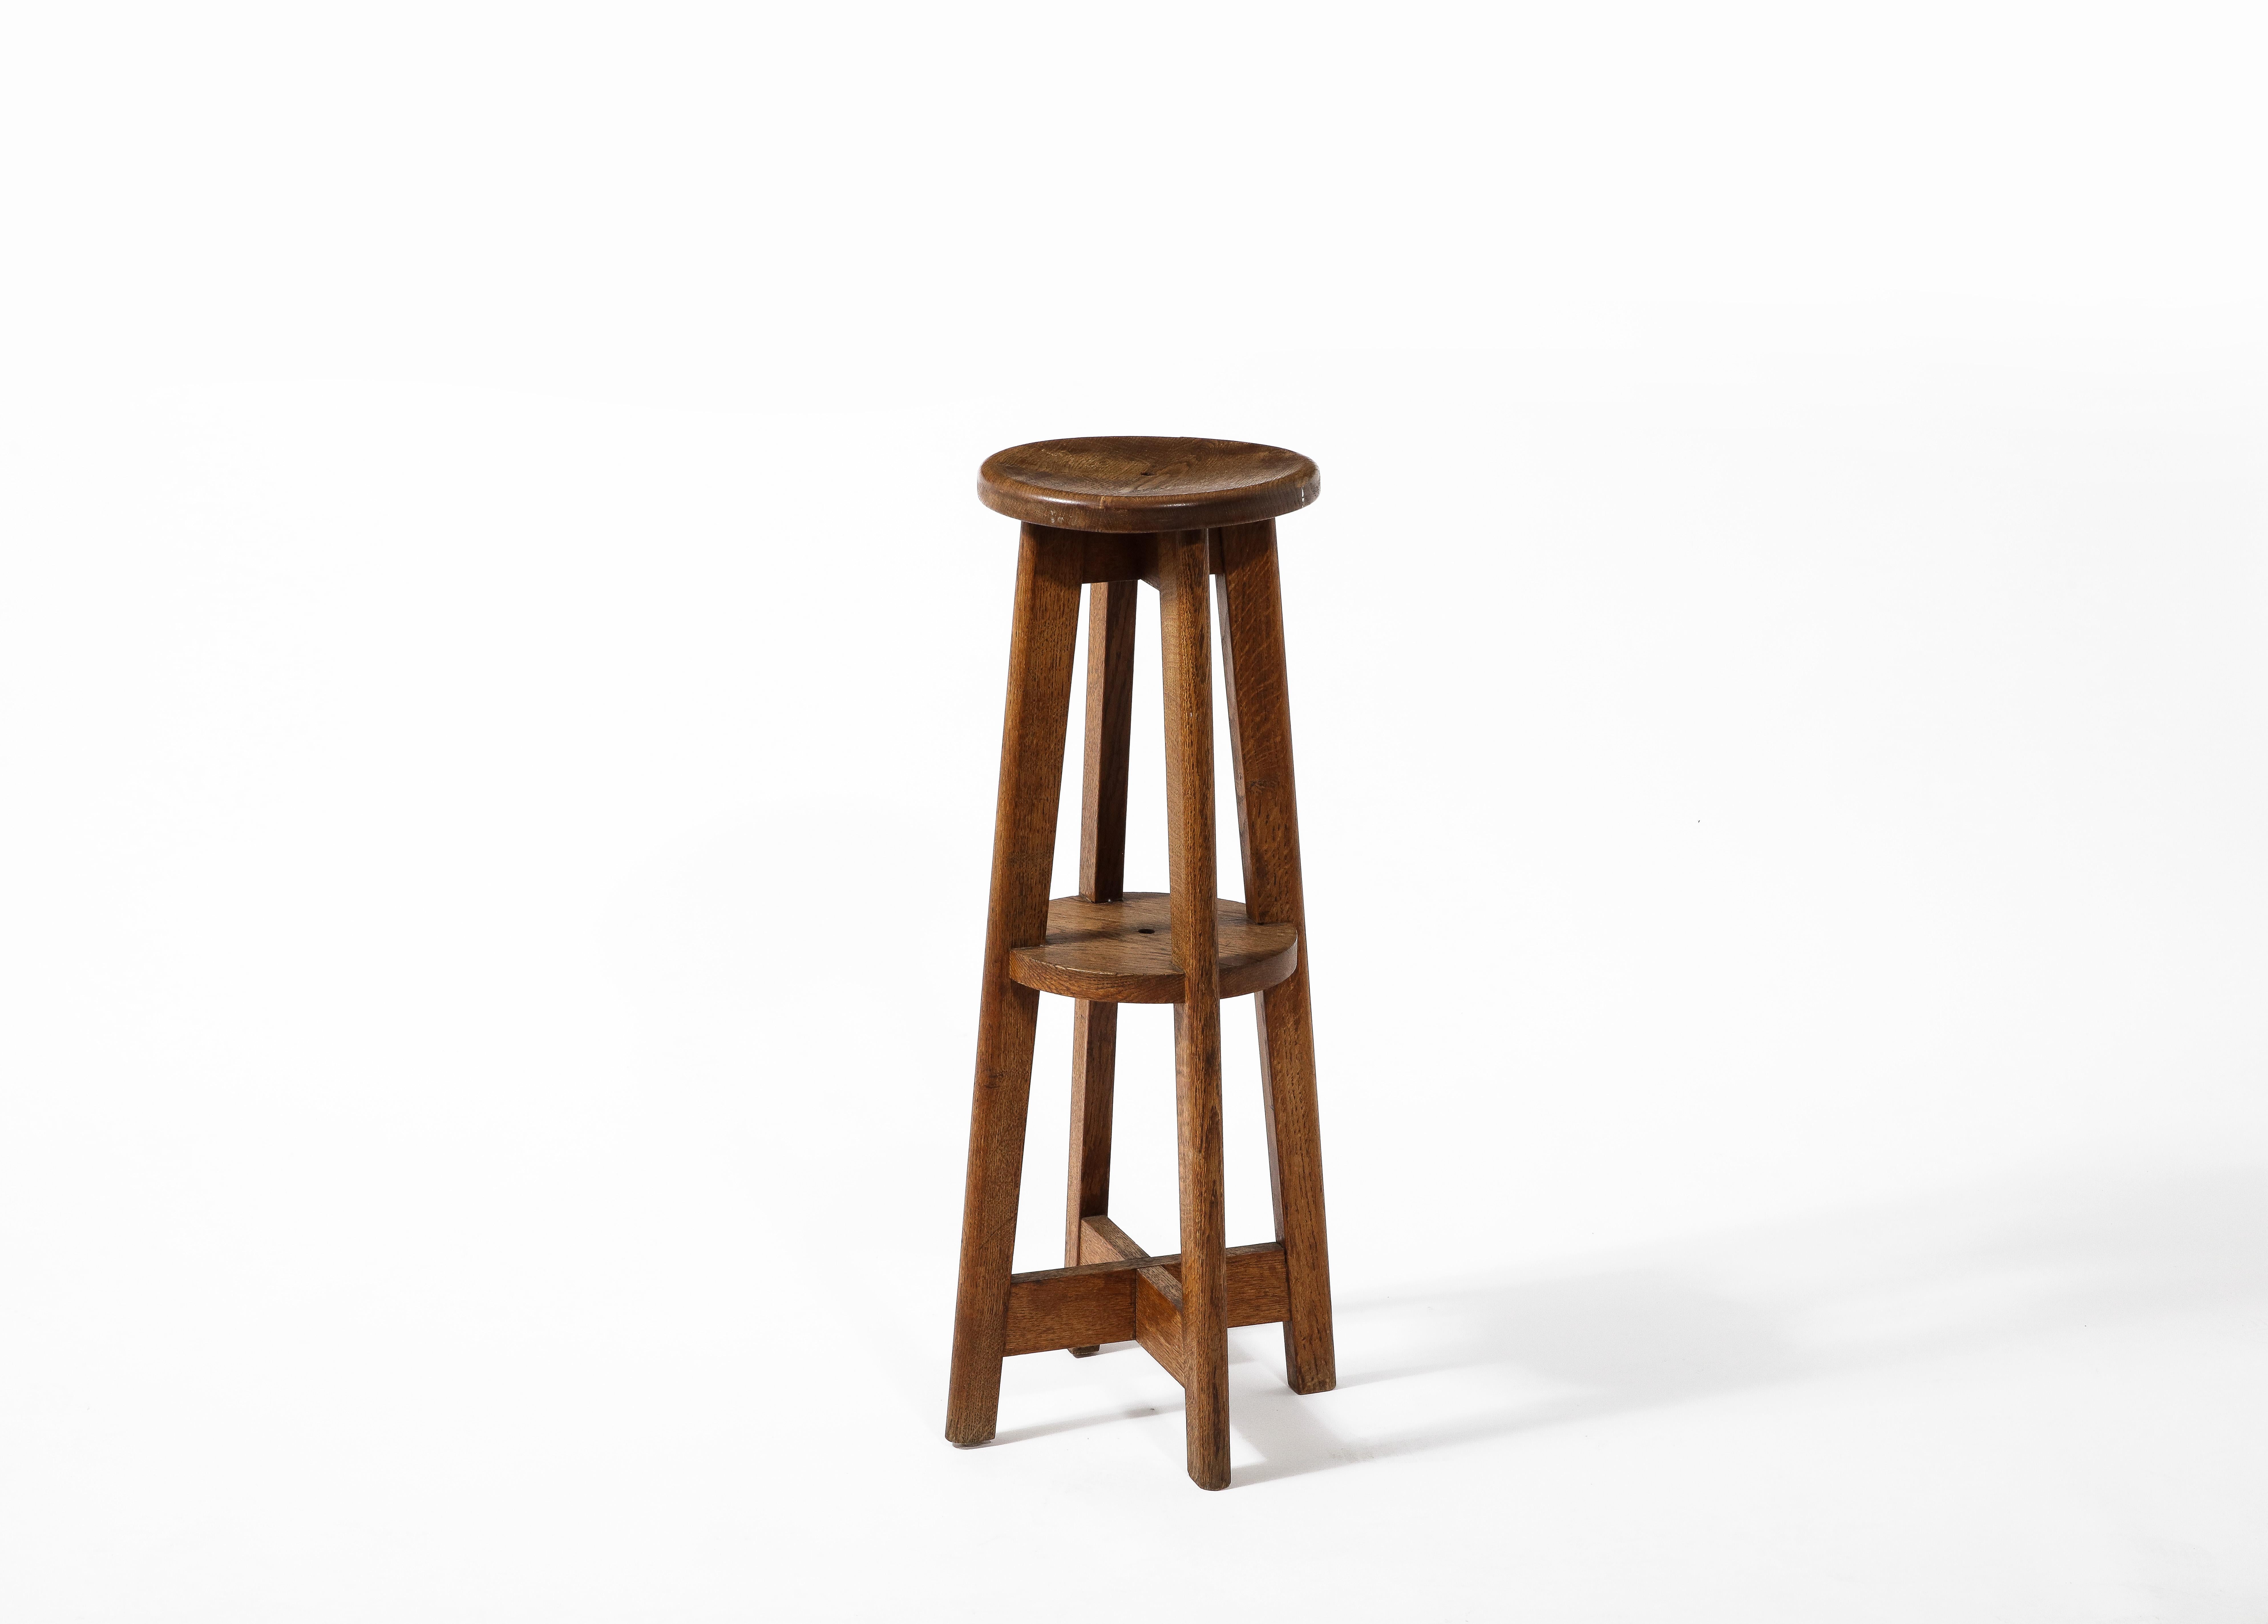 Tall Rustic Farm Stool or Pedestal in Solid Oak, France 1950's For Sale 6